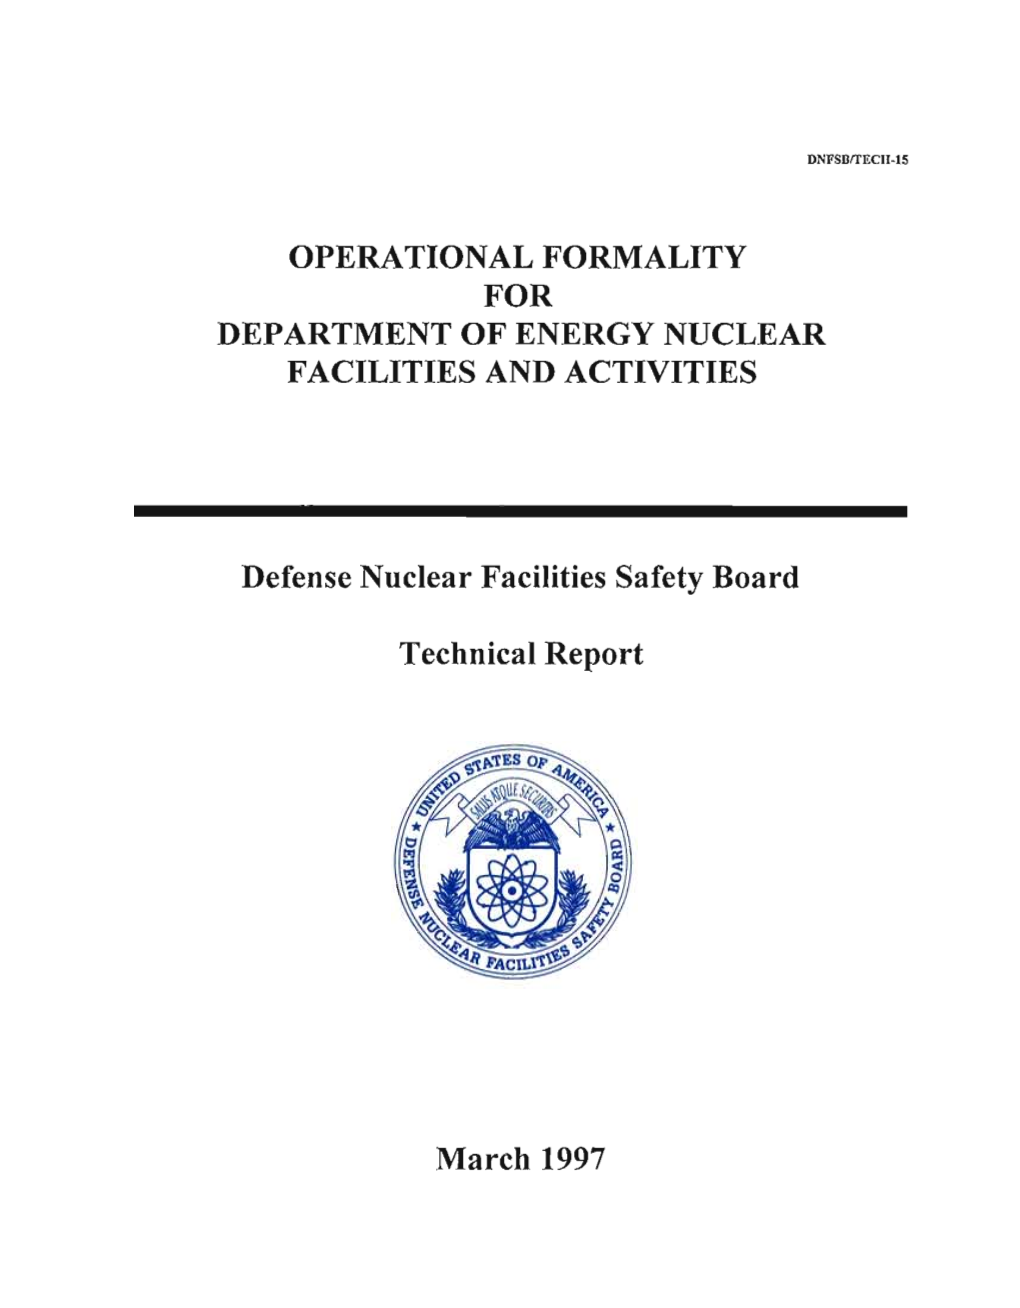 Operational Formality for Department of Energy Nuclear Facilities and Activities